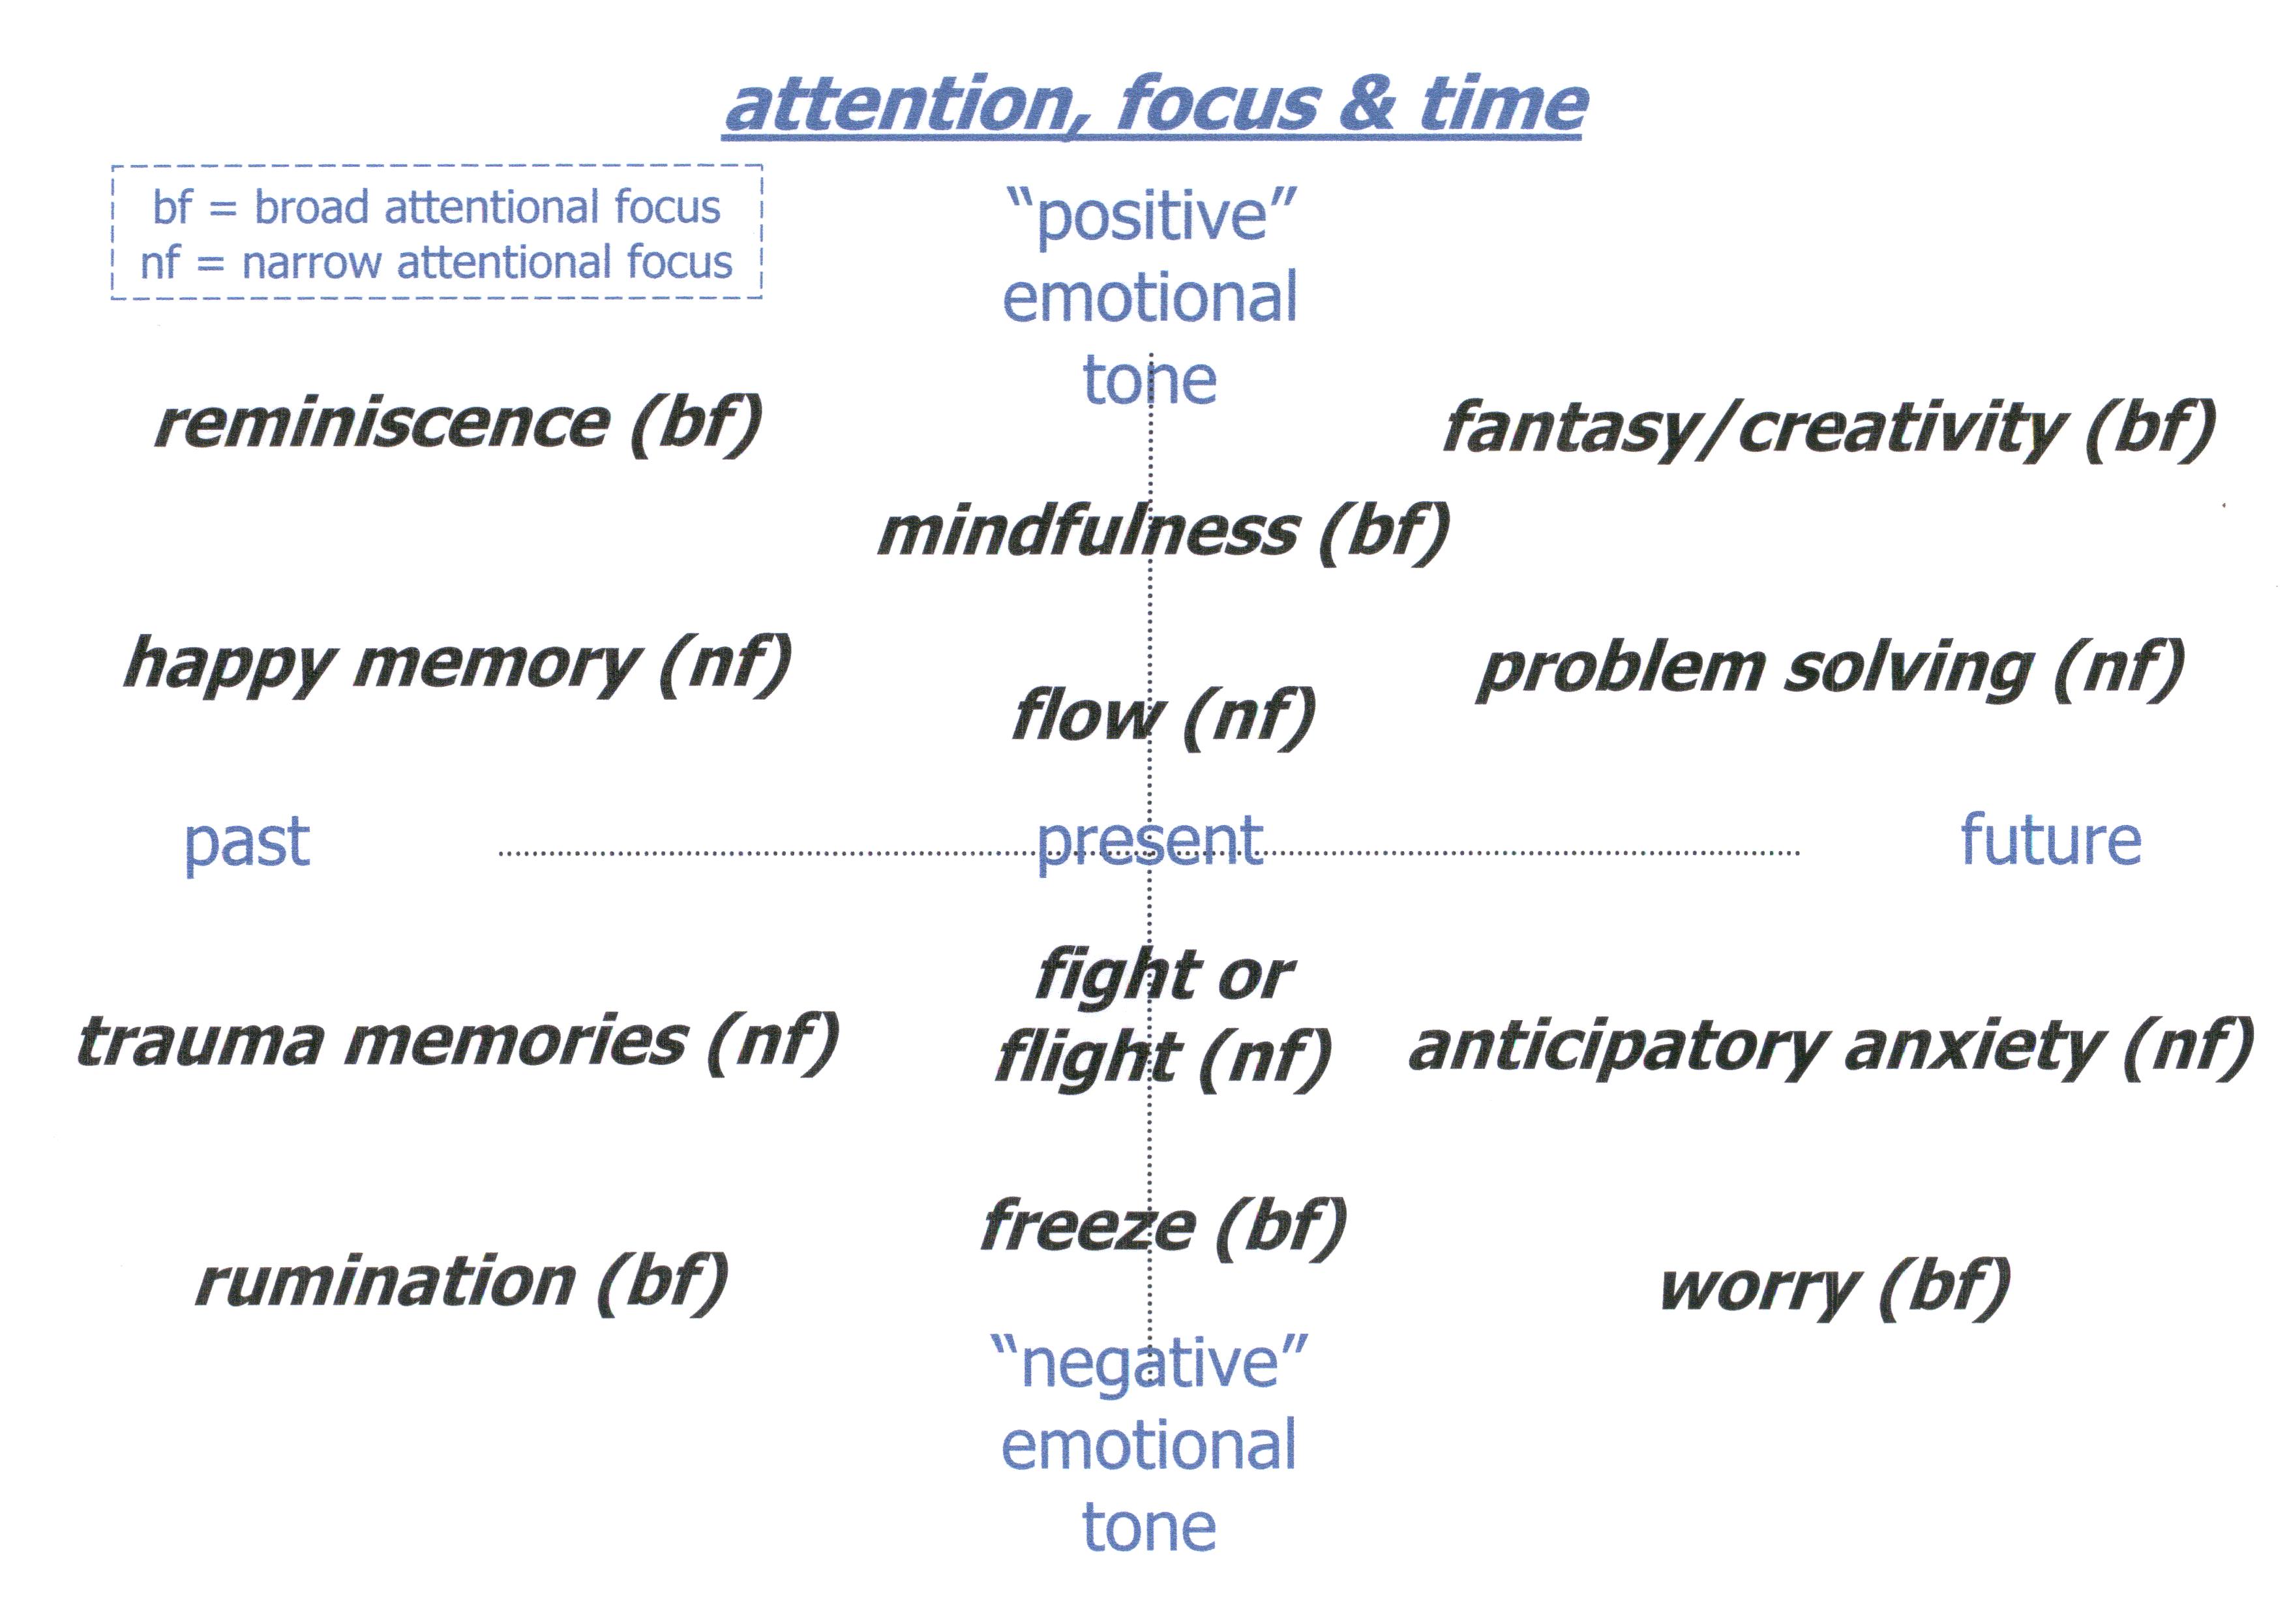 Attention, focus & time